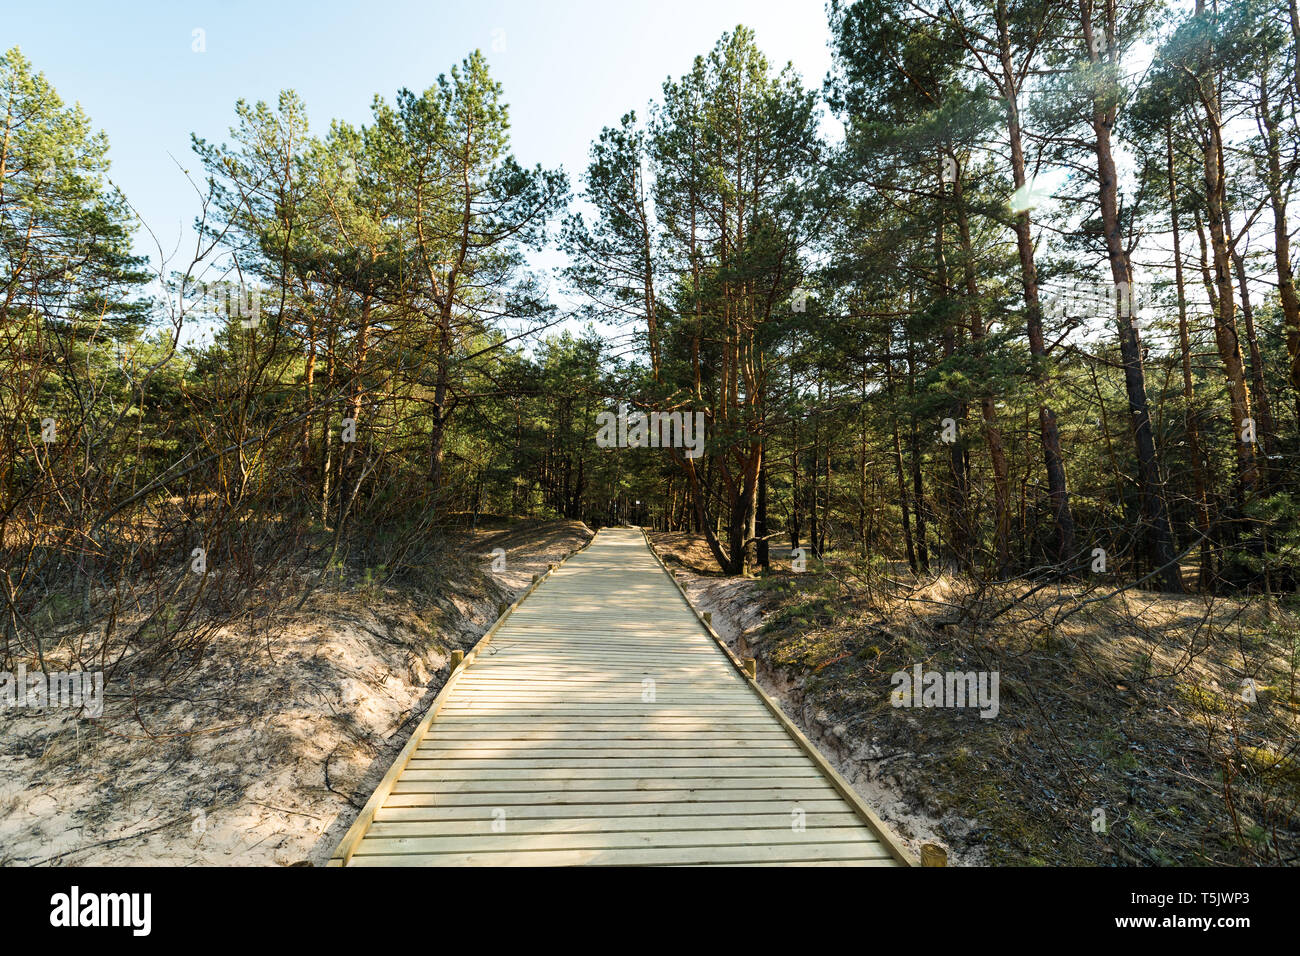 New wooden road leading from the beach of Baltic Sea gulf with white sand to the dune forest with pine trees Stock Photo